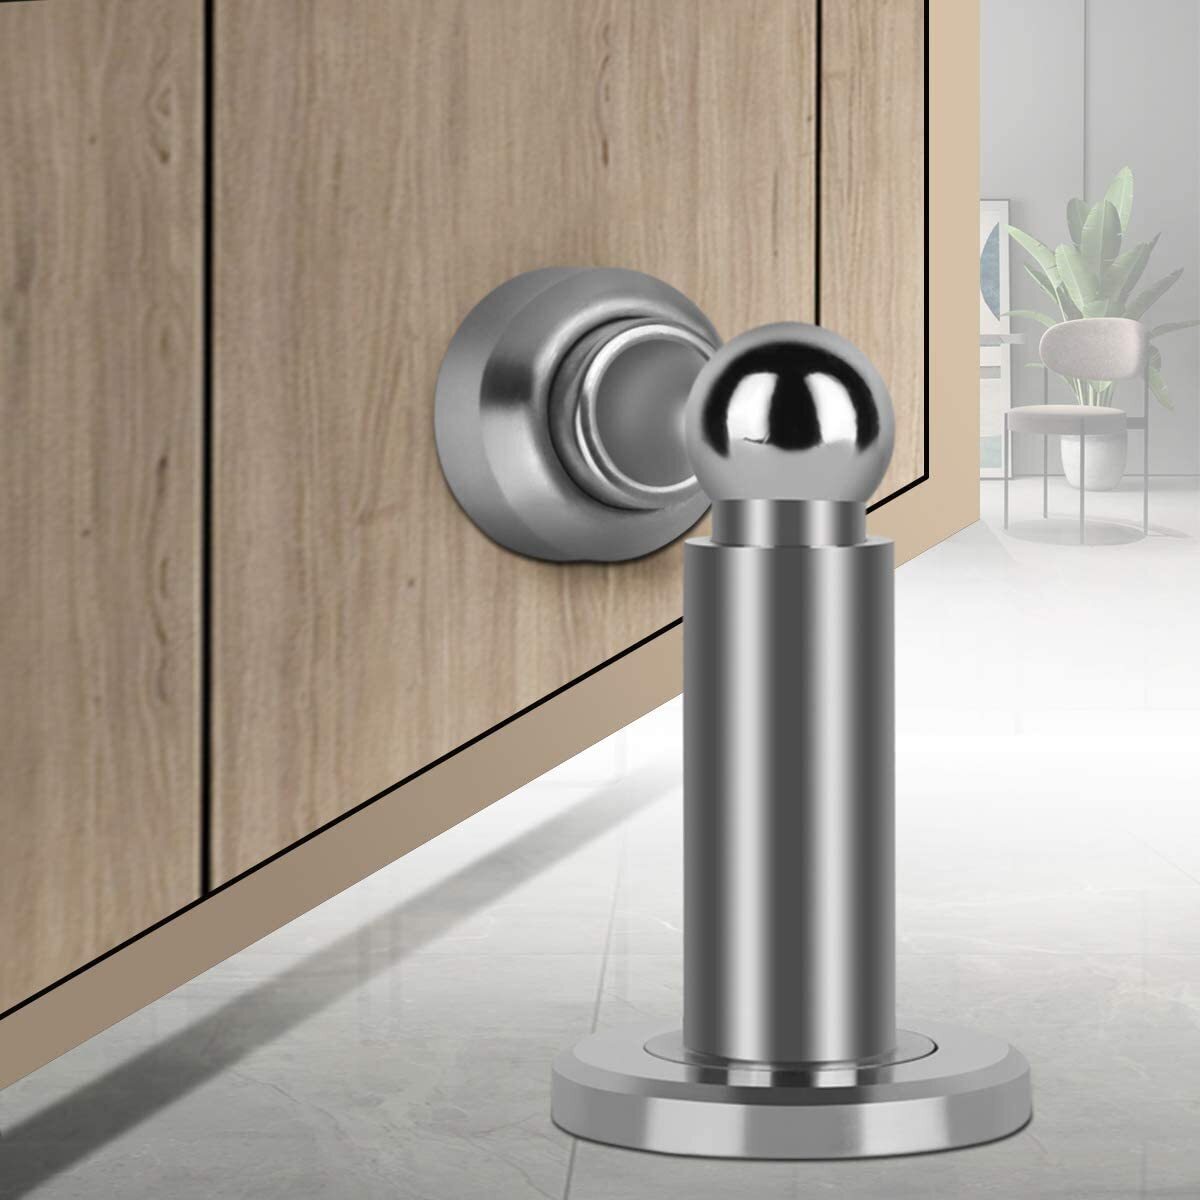 4X Magnetic Door Holder Stoppers Doorstop Wall Floor Mounted Safety Catch Office AllTopBargains 